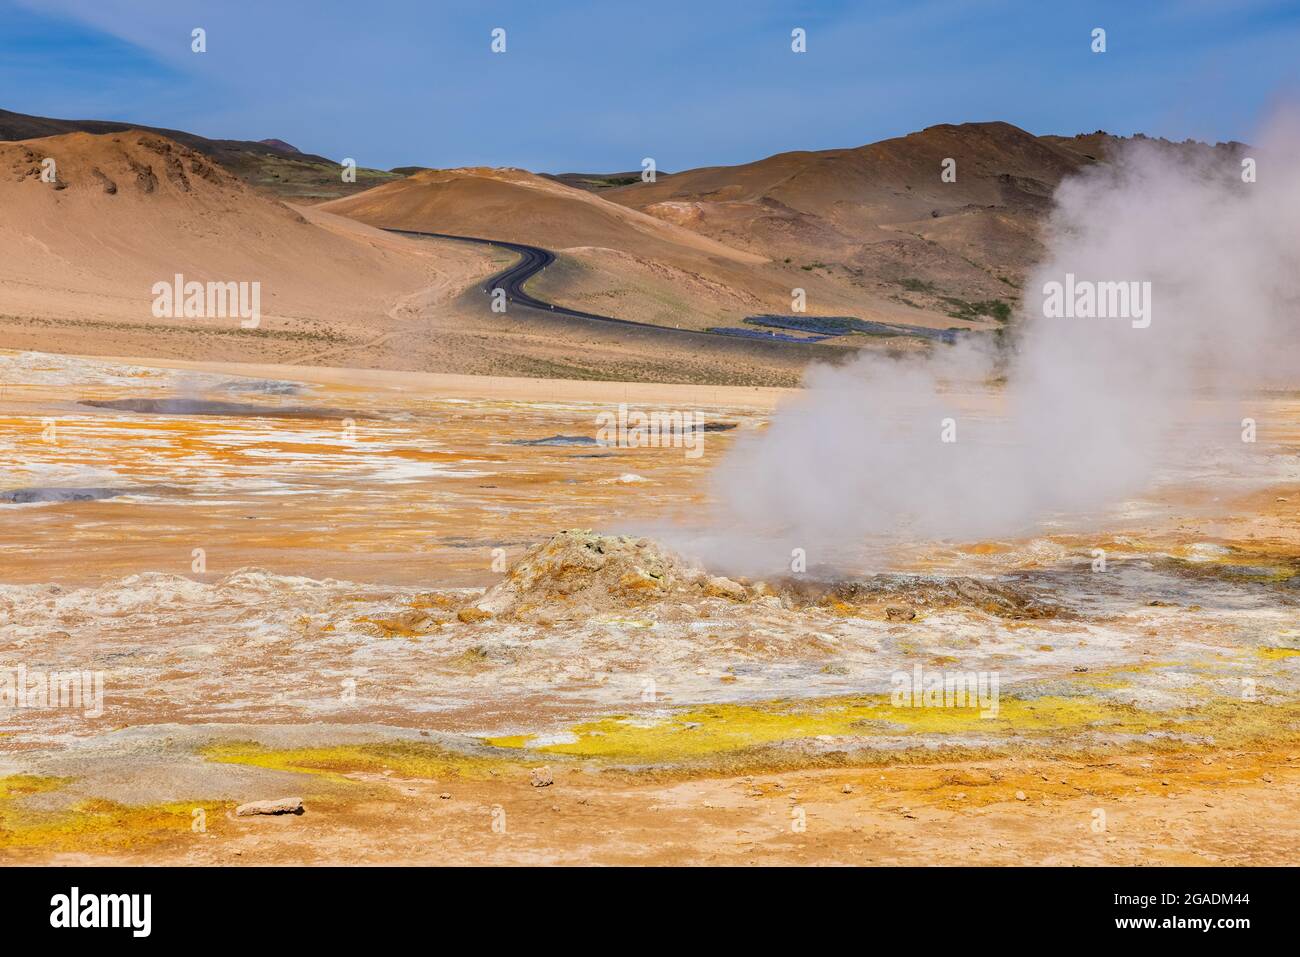 steam rises from sulphurous mud pools in the surreal lunar landscape area of hverir in the namafjall region to the east of lake myvatn Stock Photo